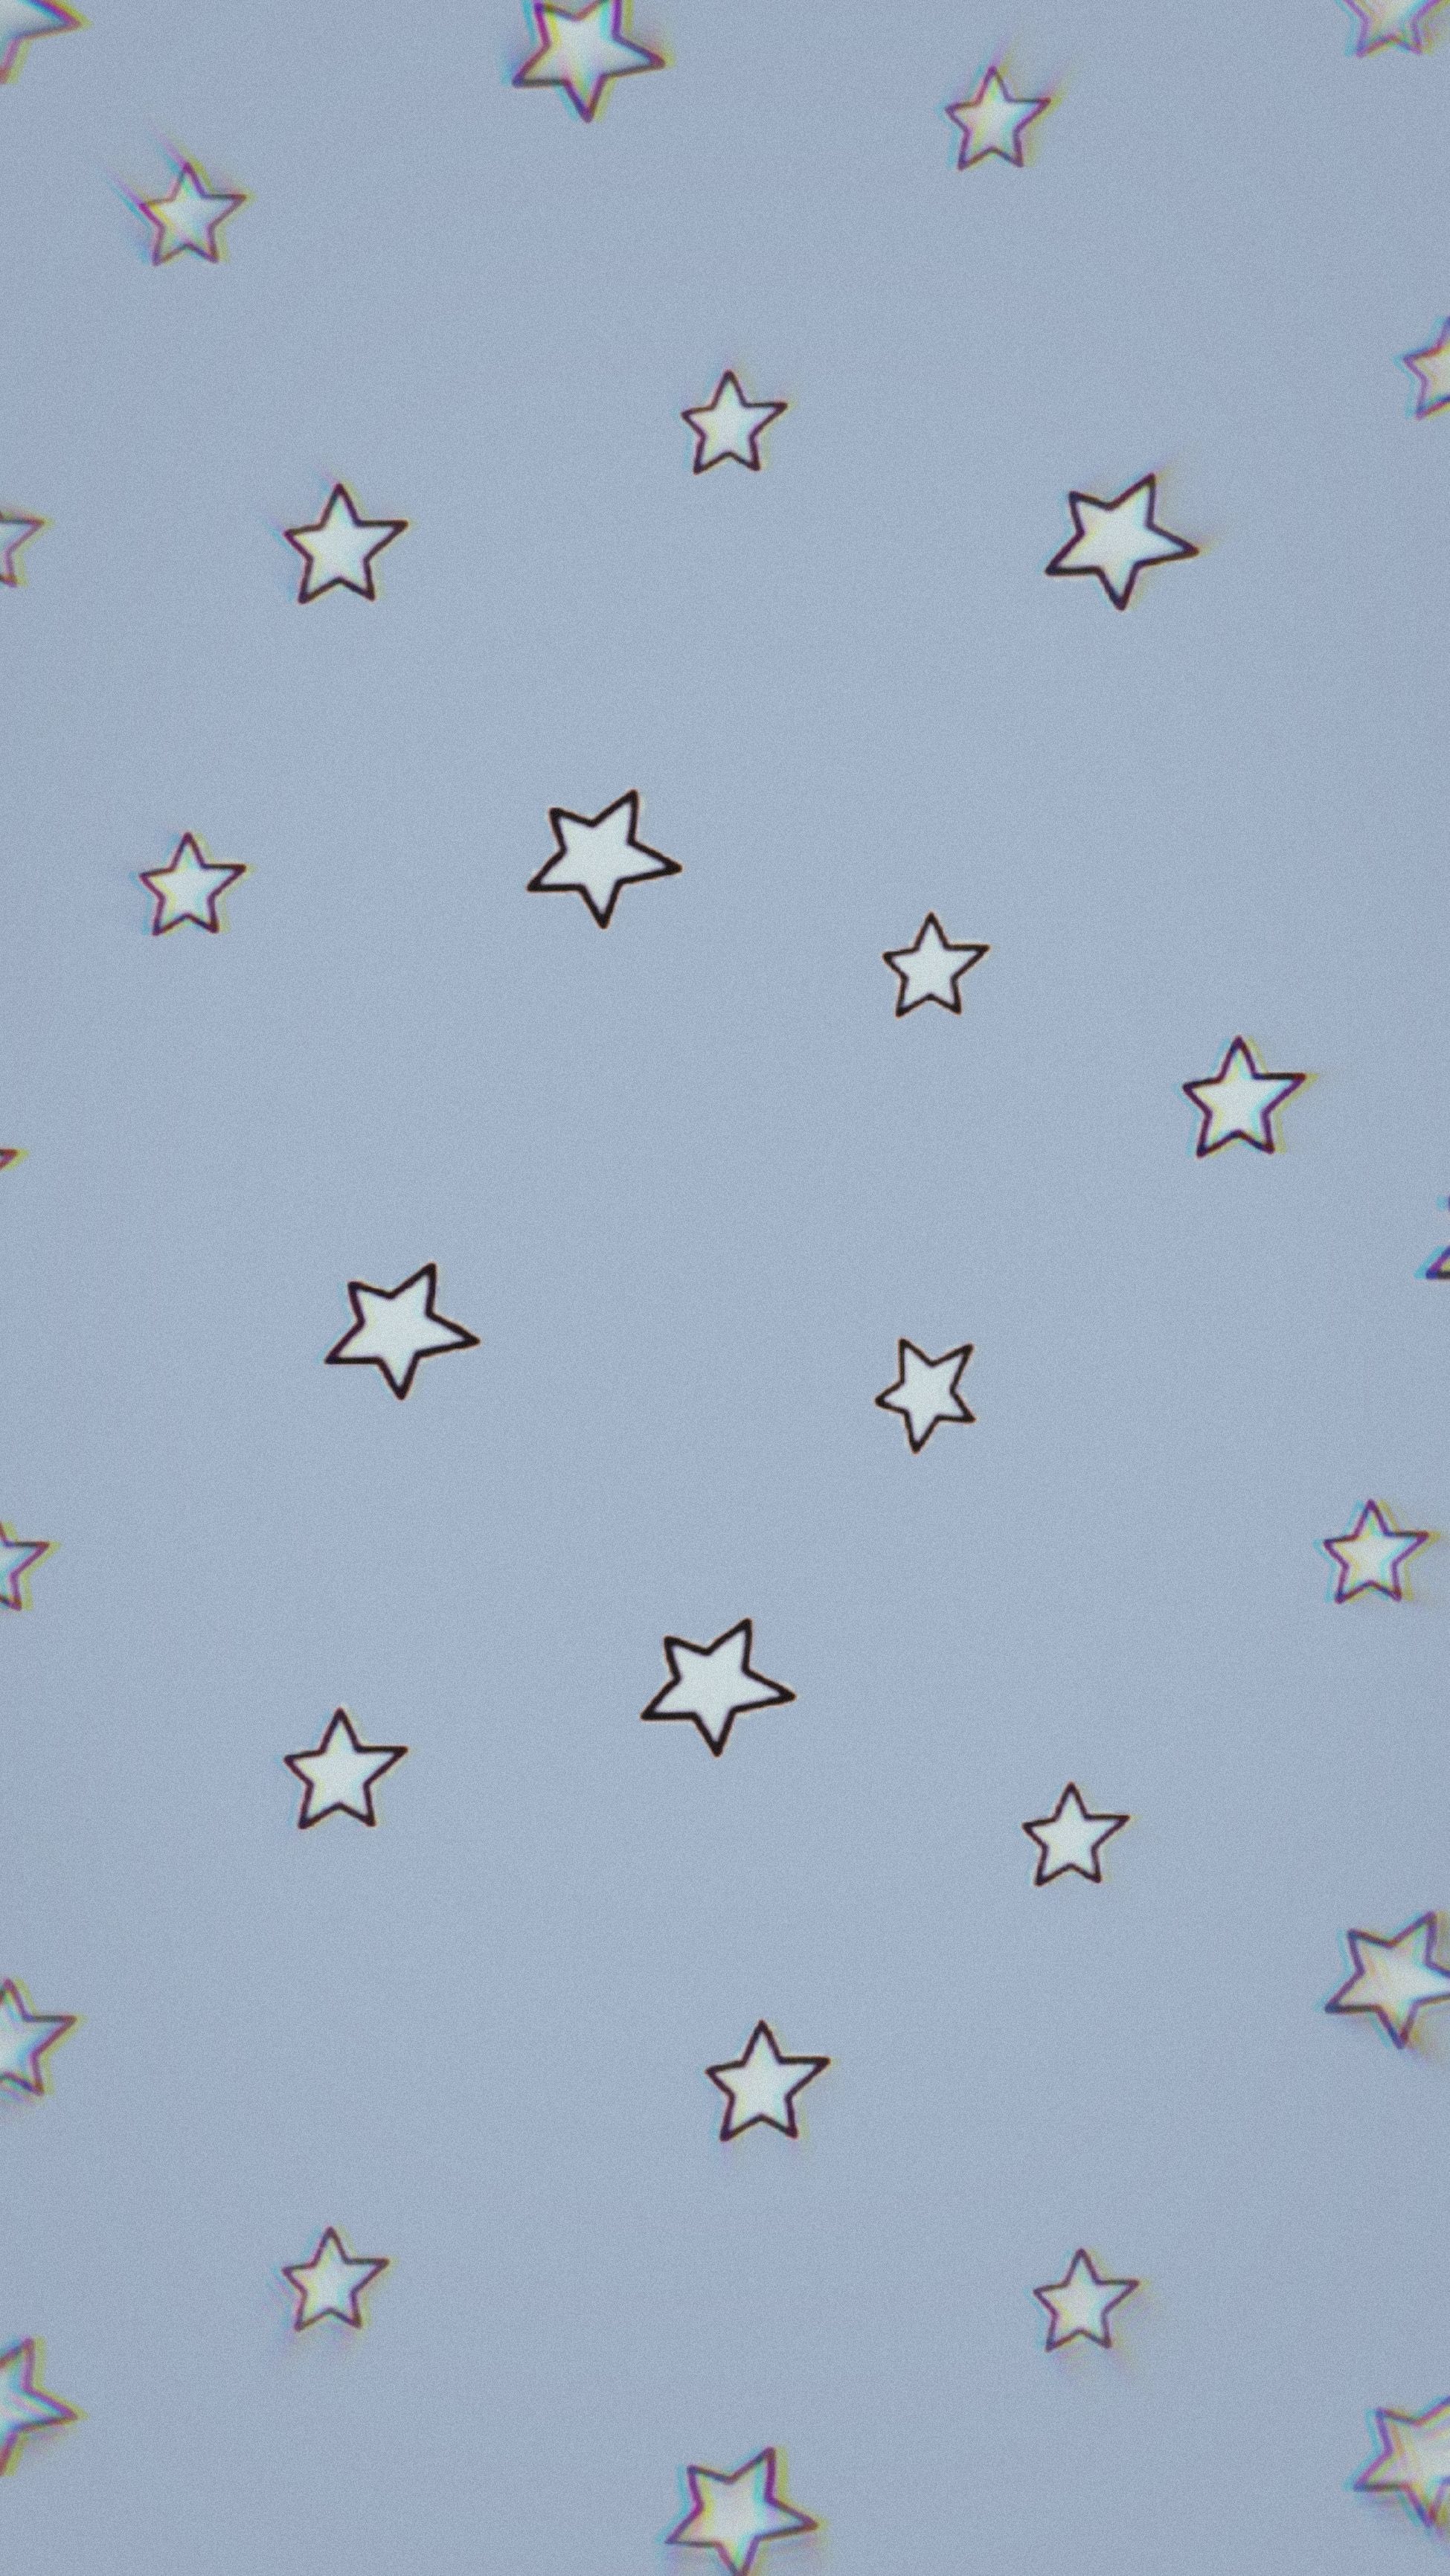 ✰ Simple Aesthetic Stars Phone Wallpaper #MadeWithPicsArt ✰. Cute patterns wallpaper, Iconic wallpaper, iPhone background wallpaper